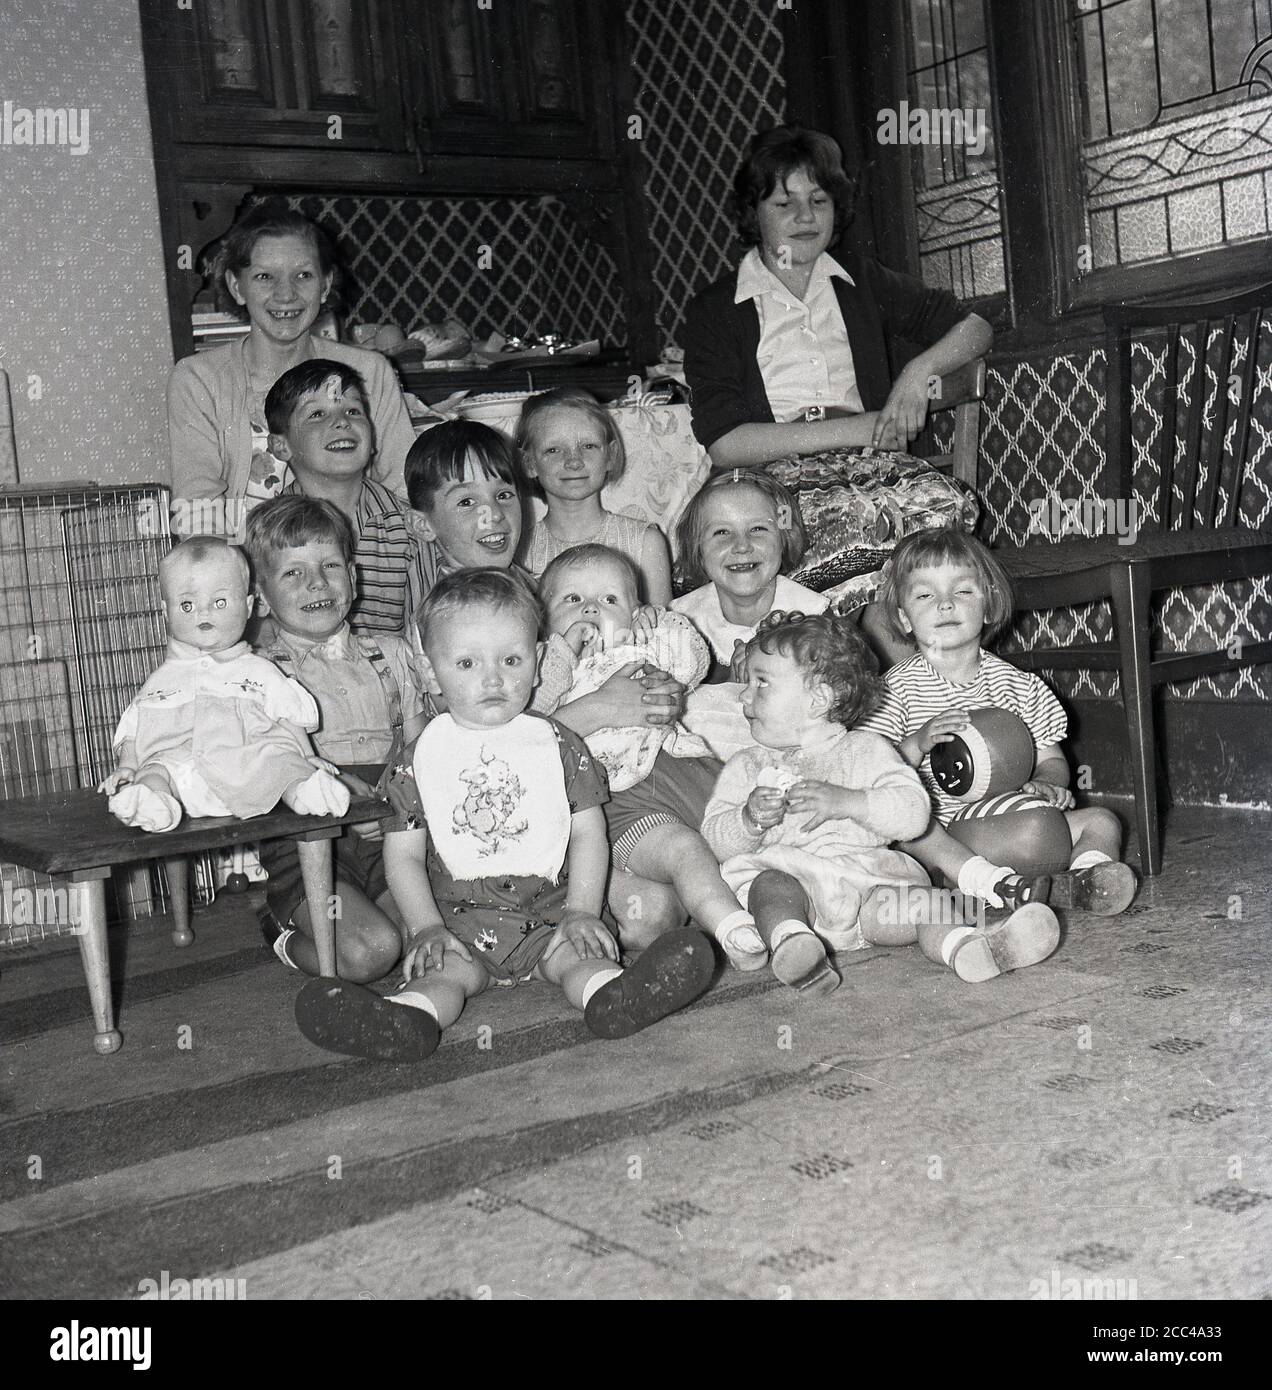 1950s, historical, group of scruffy but happy young and infant children sitting together in a  corner of a large room. Stock Photo